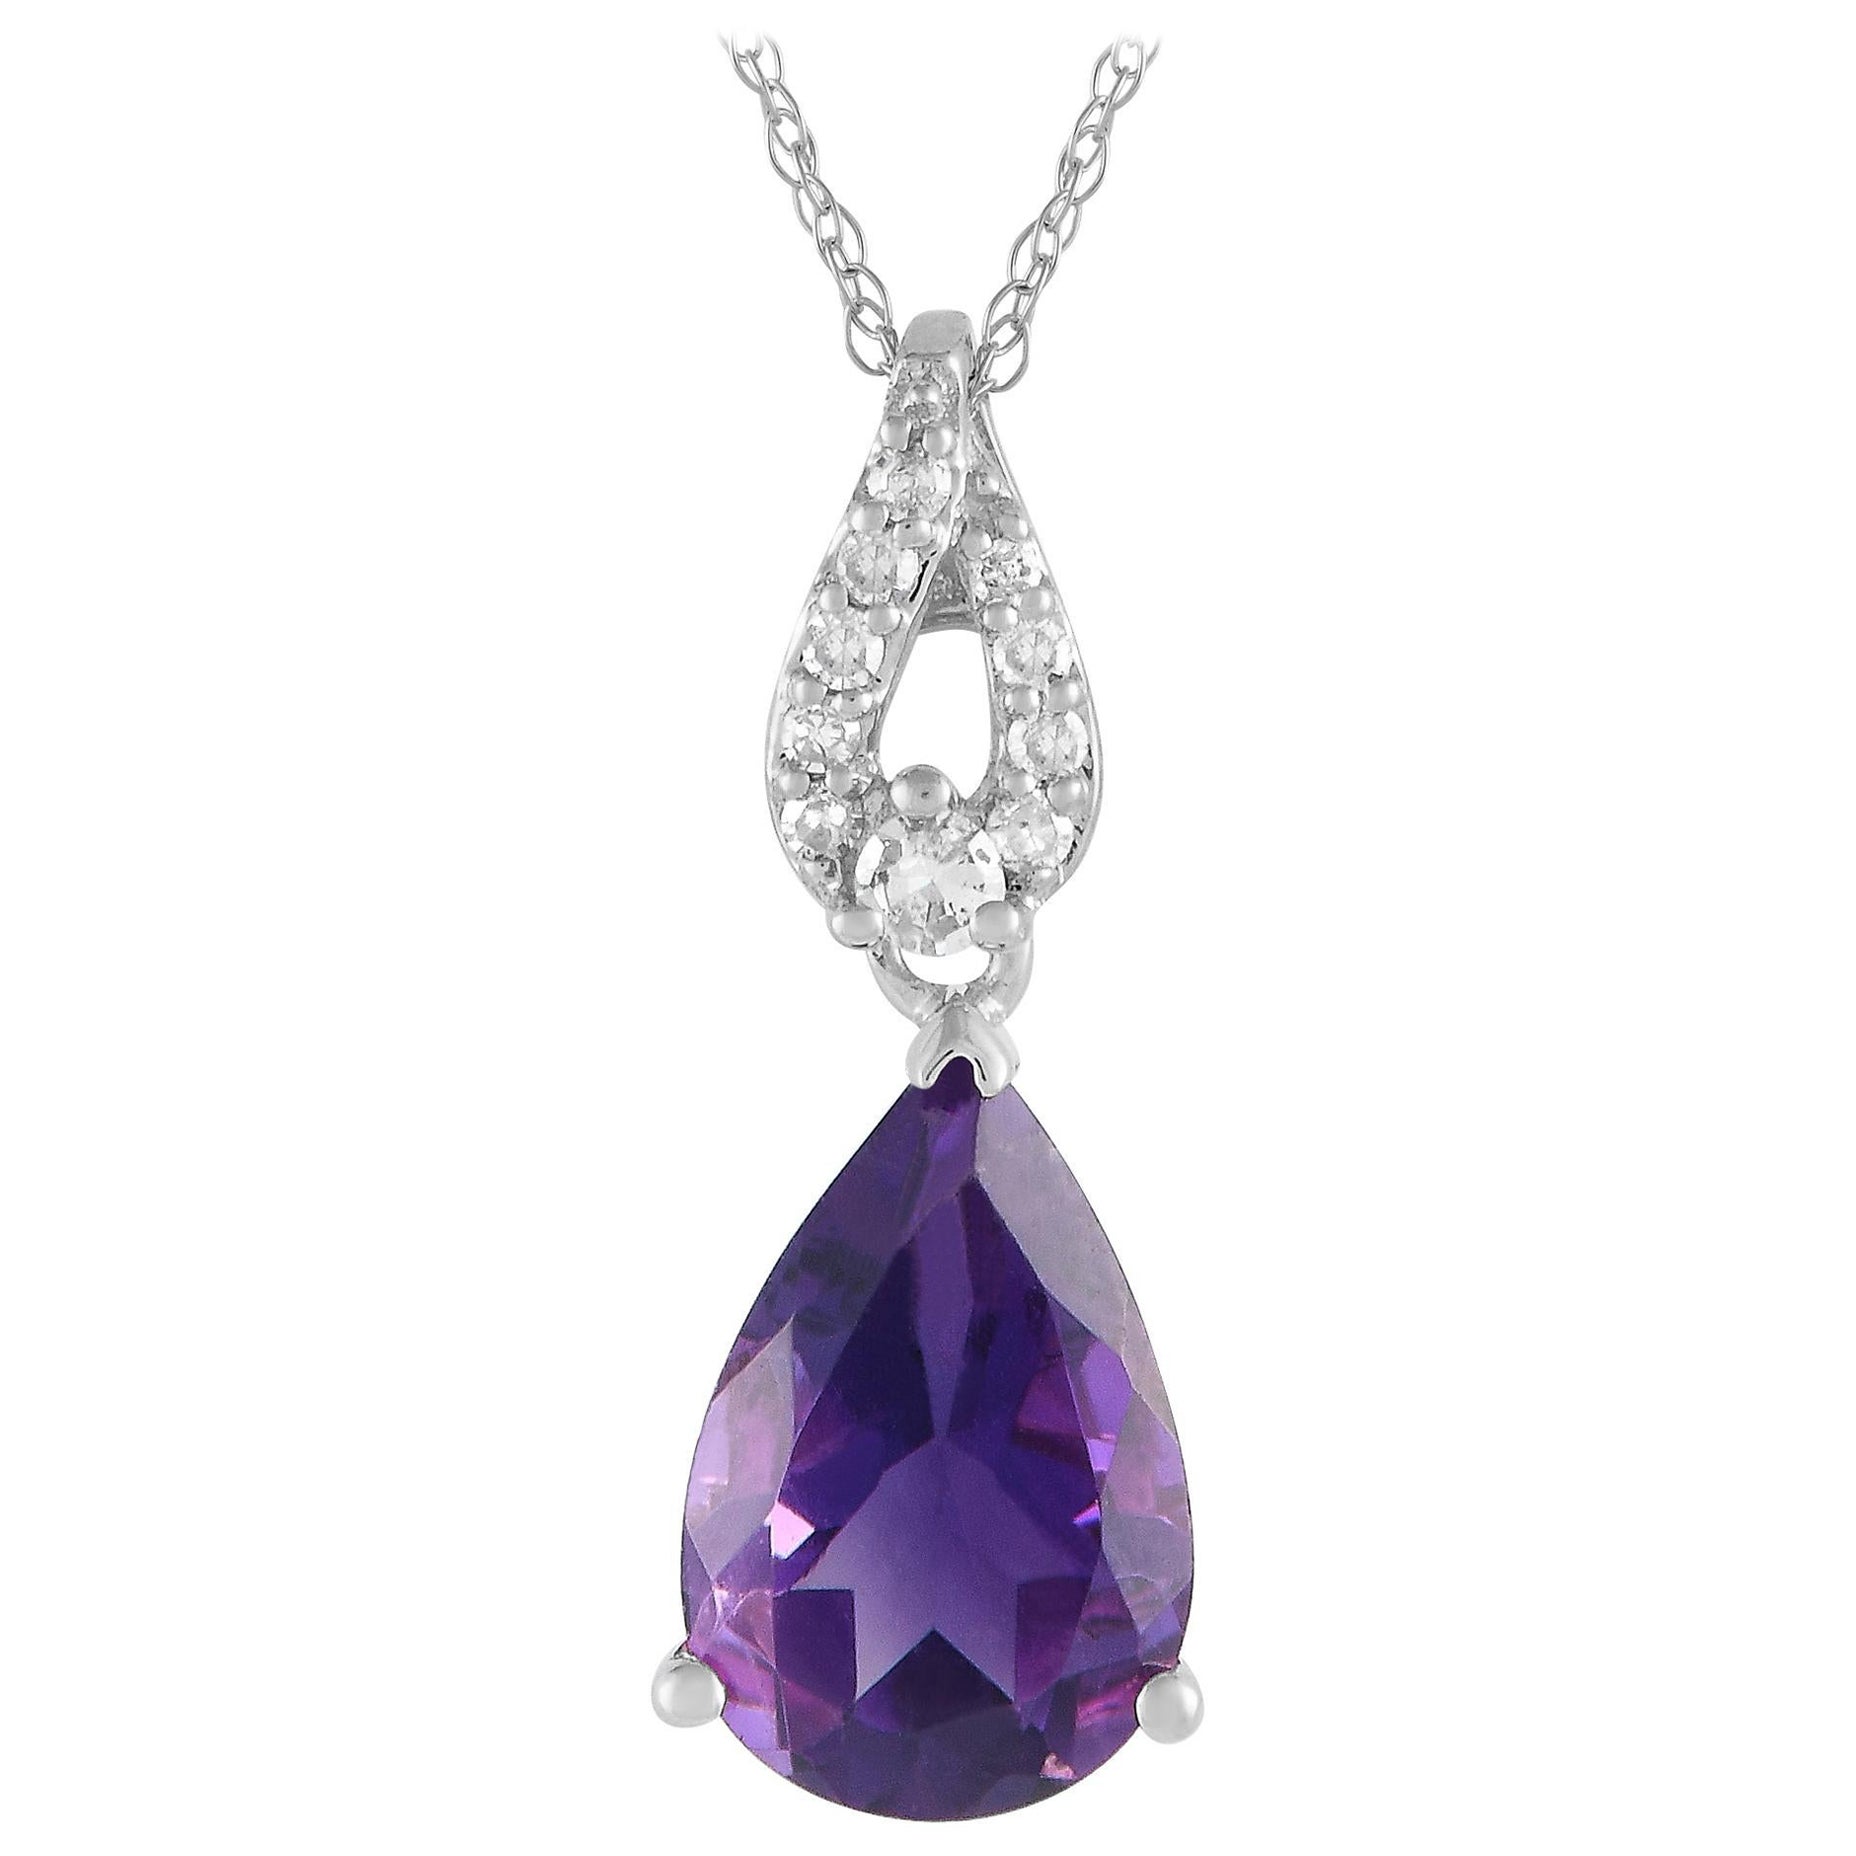 LB Exclusive 14K White Gold 0.06ct Diamond & Amethyst Pear Necklace PD4-16184WAM For Sale